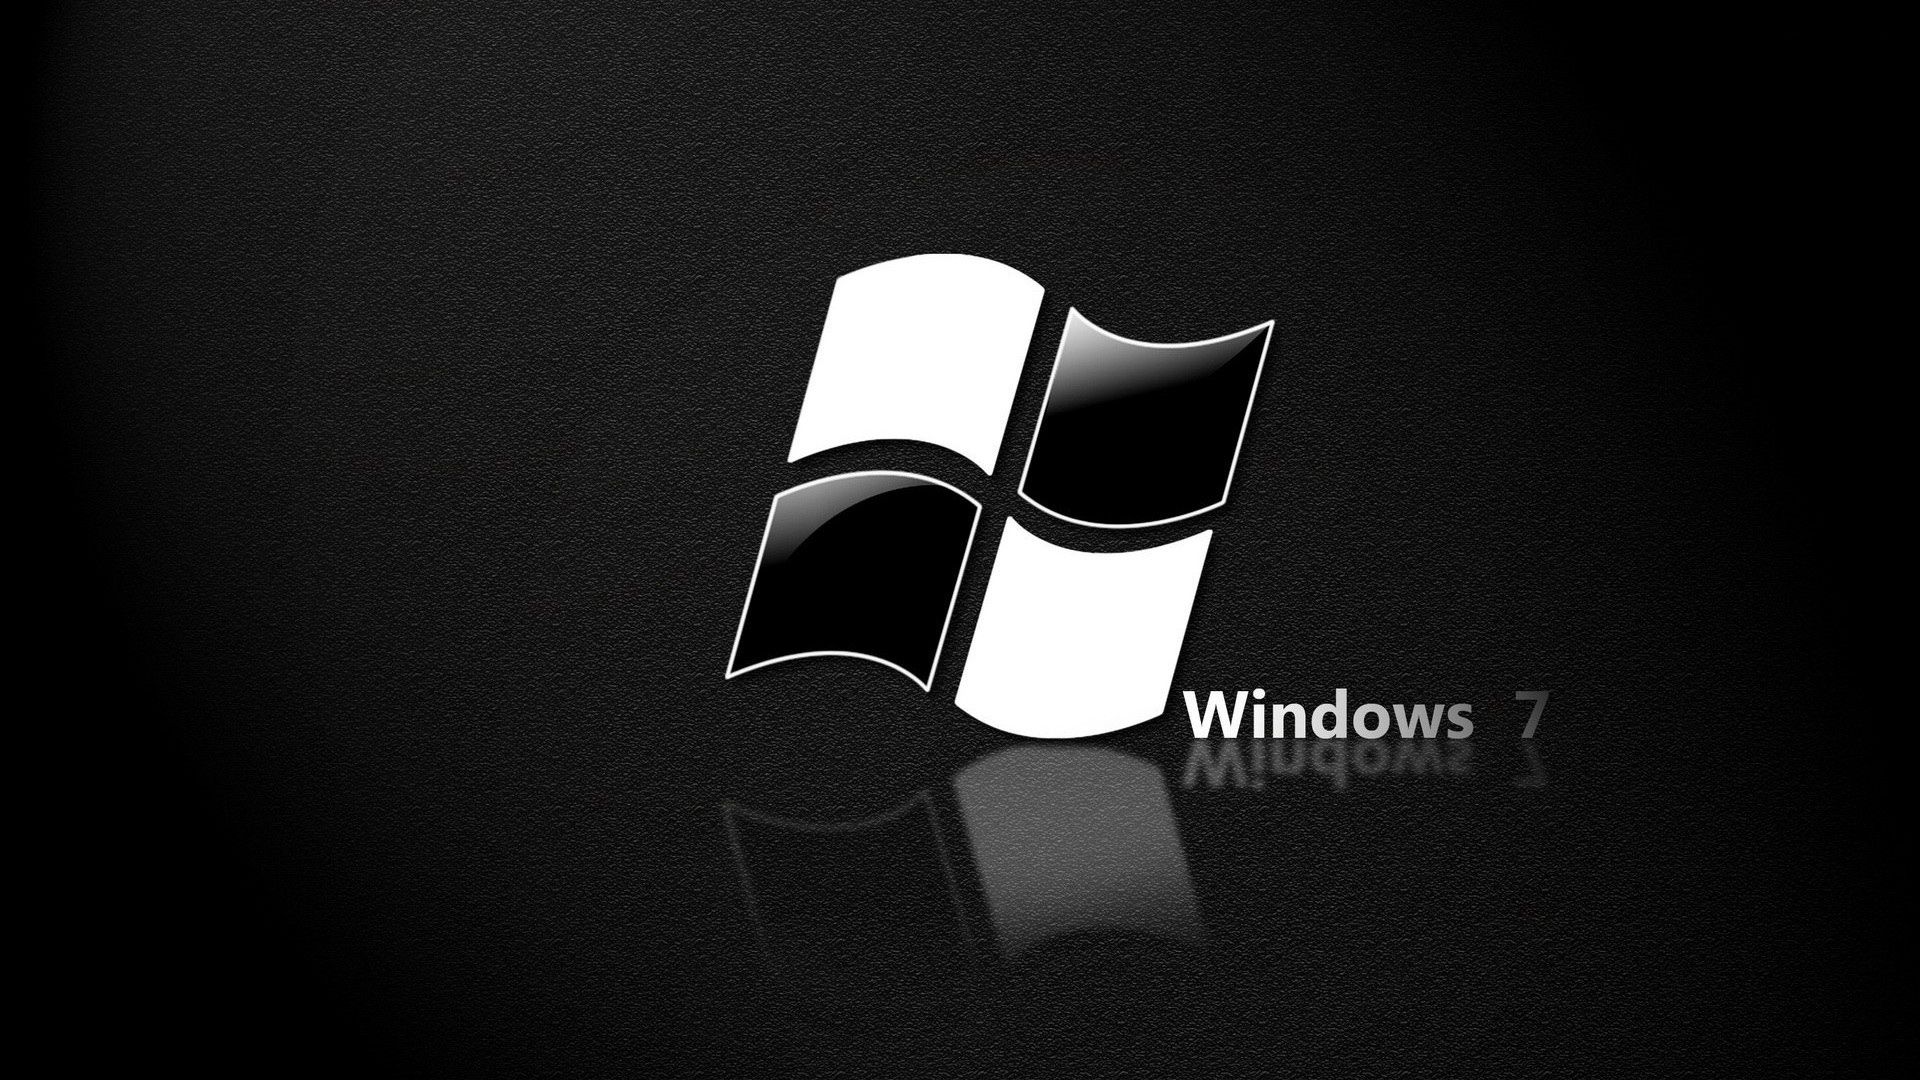 Black And White Windows 7 Image #17337 Wallpaper | High Resolution ...